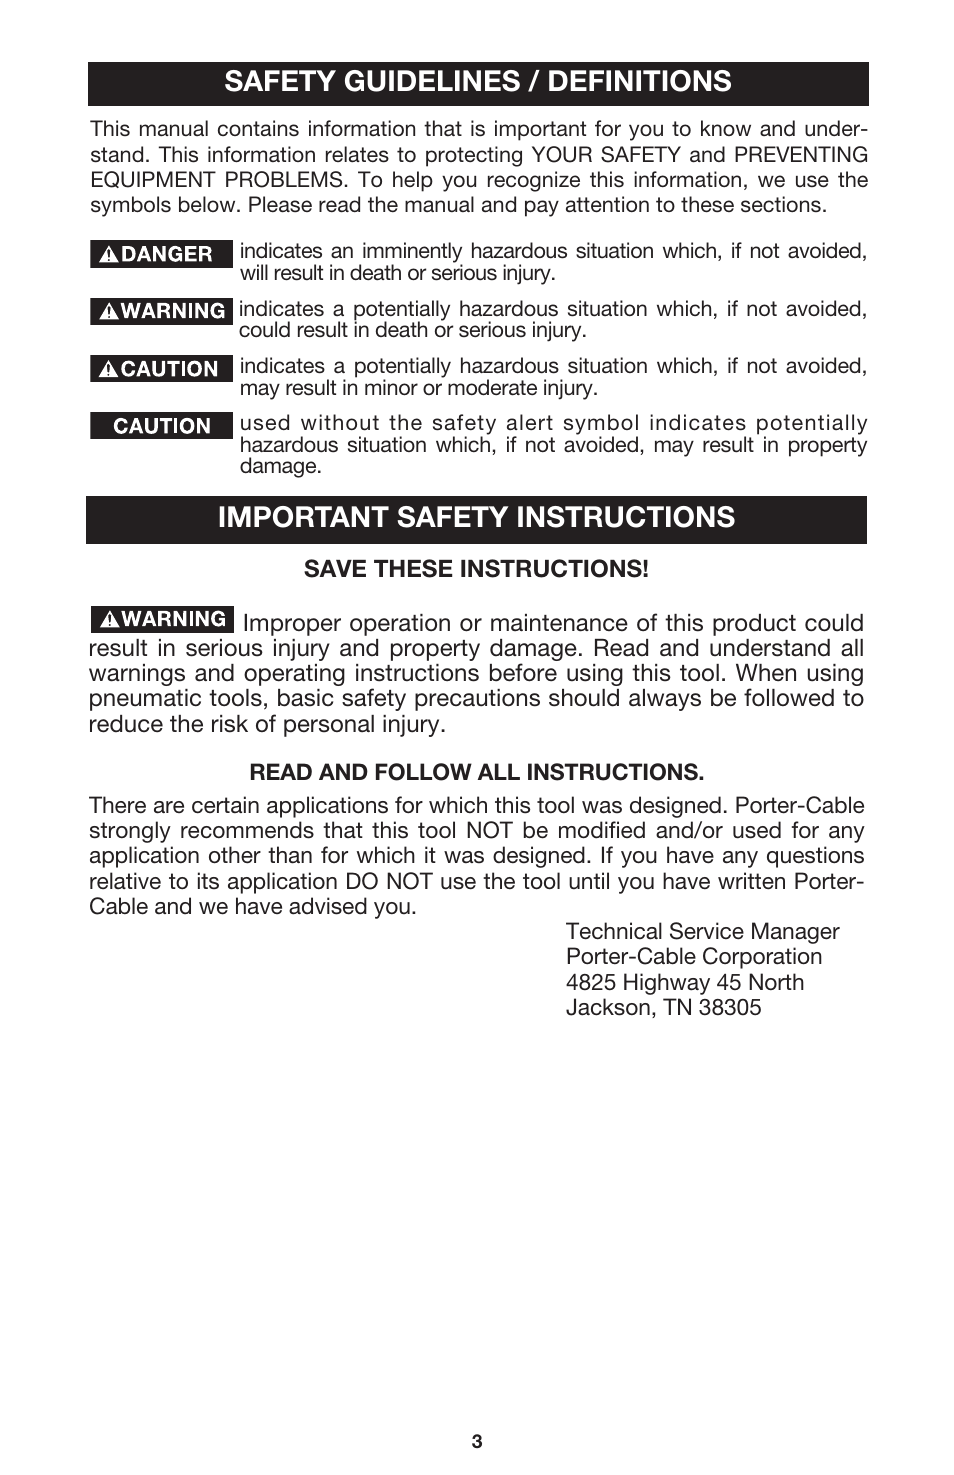 Safety guidelines / definitions, Important safety instructions | Porter